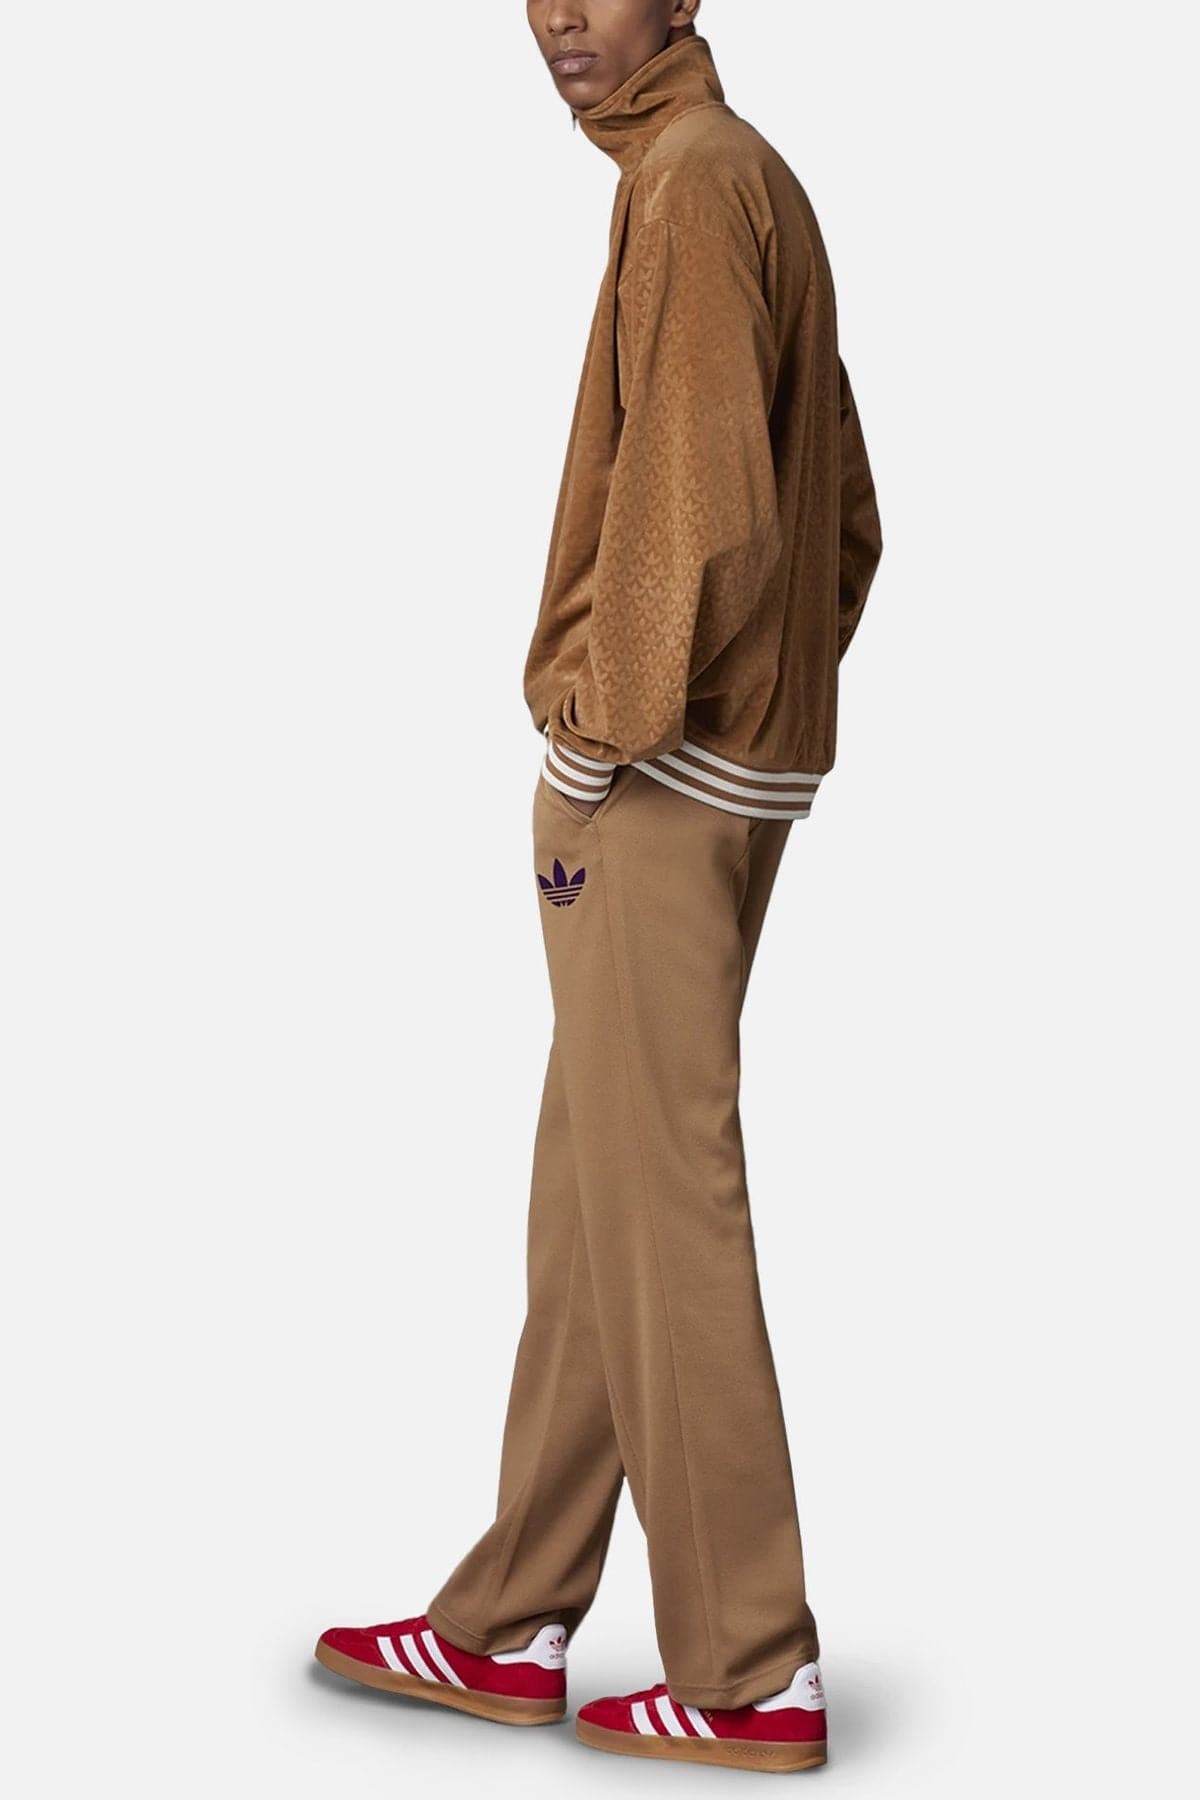 STAND ALONE Flared Track Pants - Brown